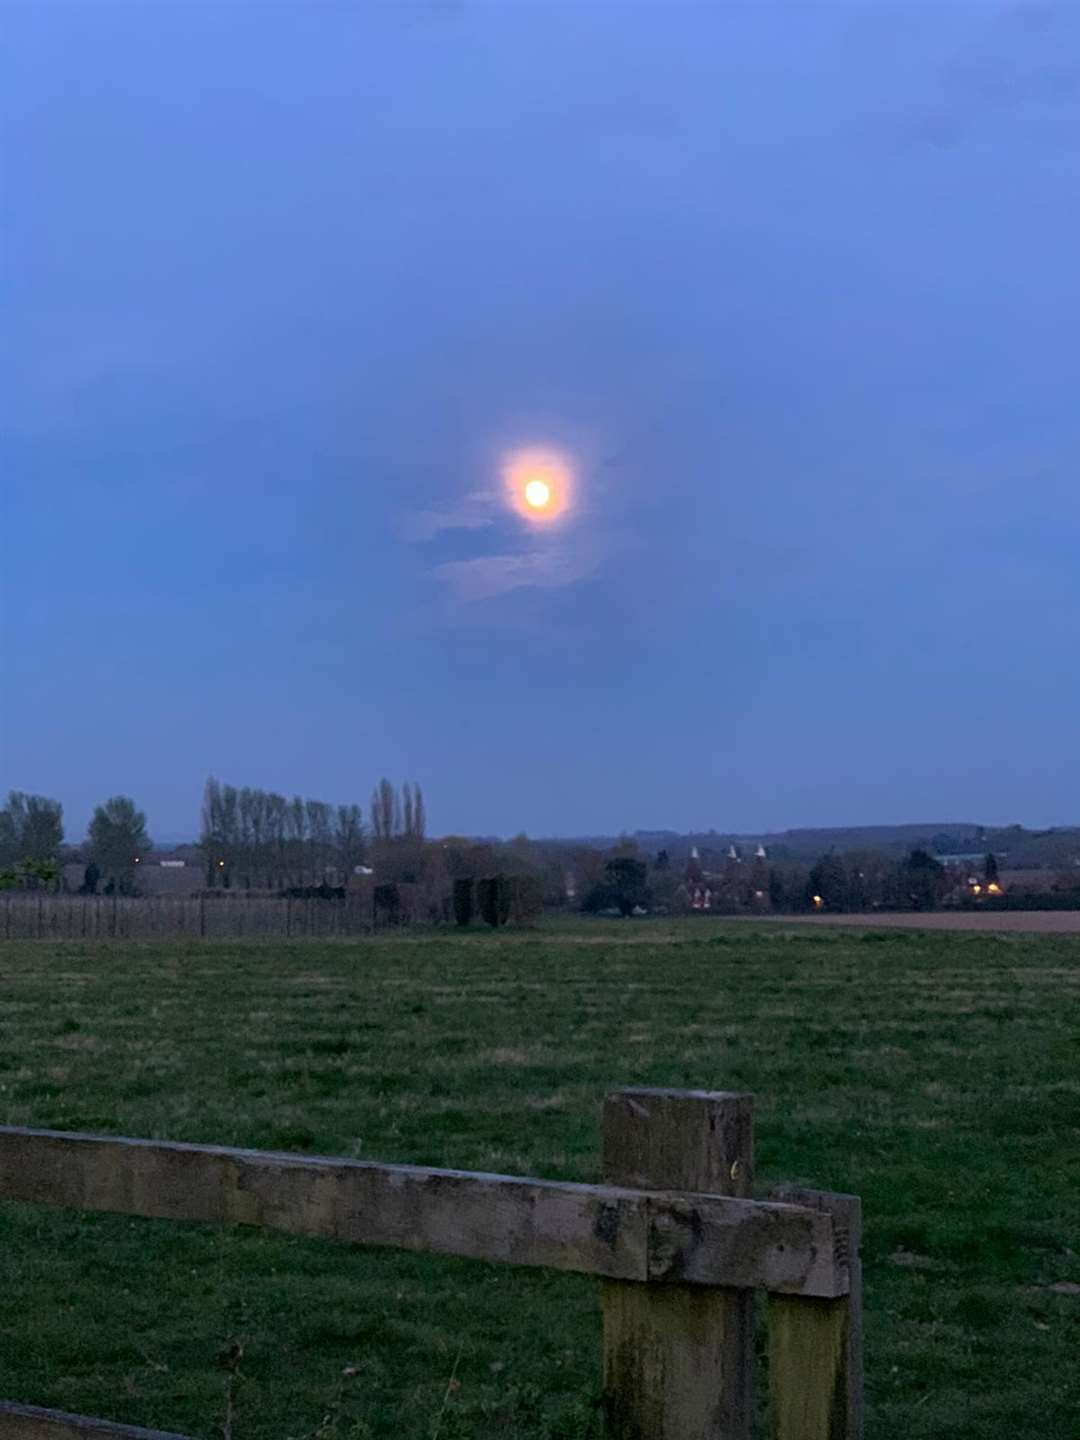 A stunning view from East Malling. Picture: Angie Withers